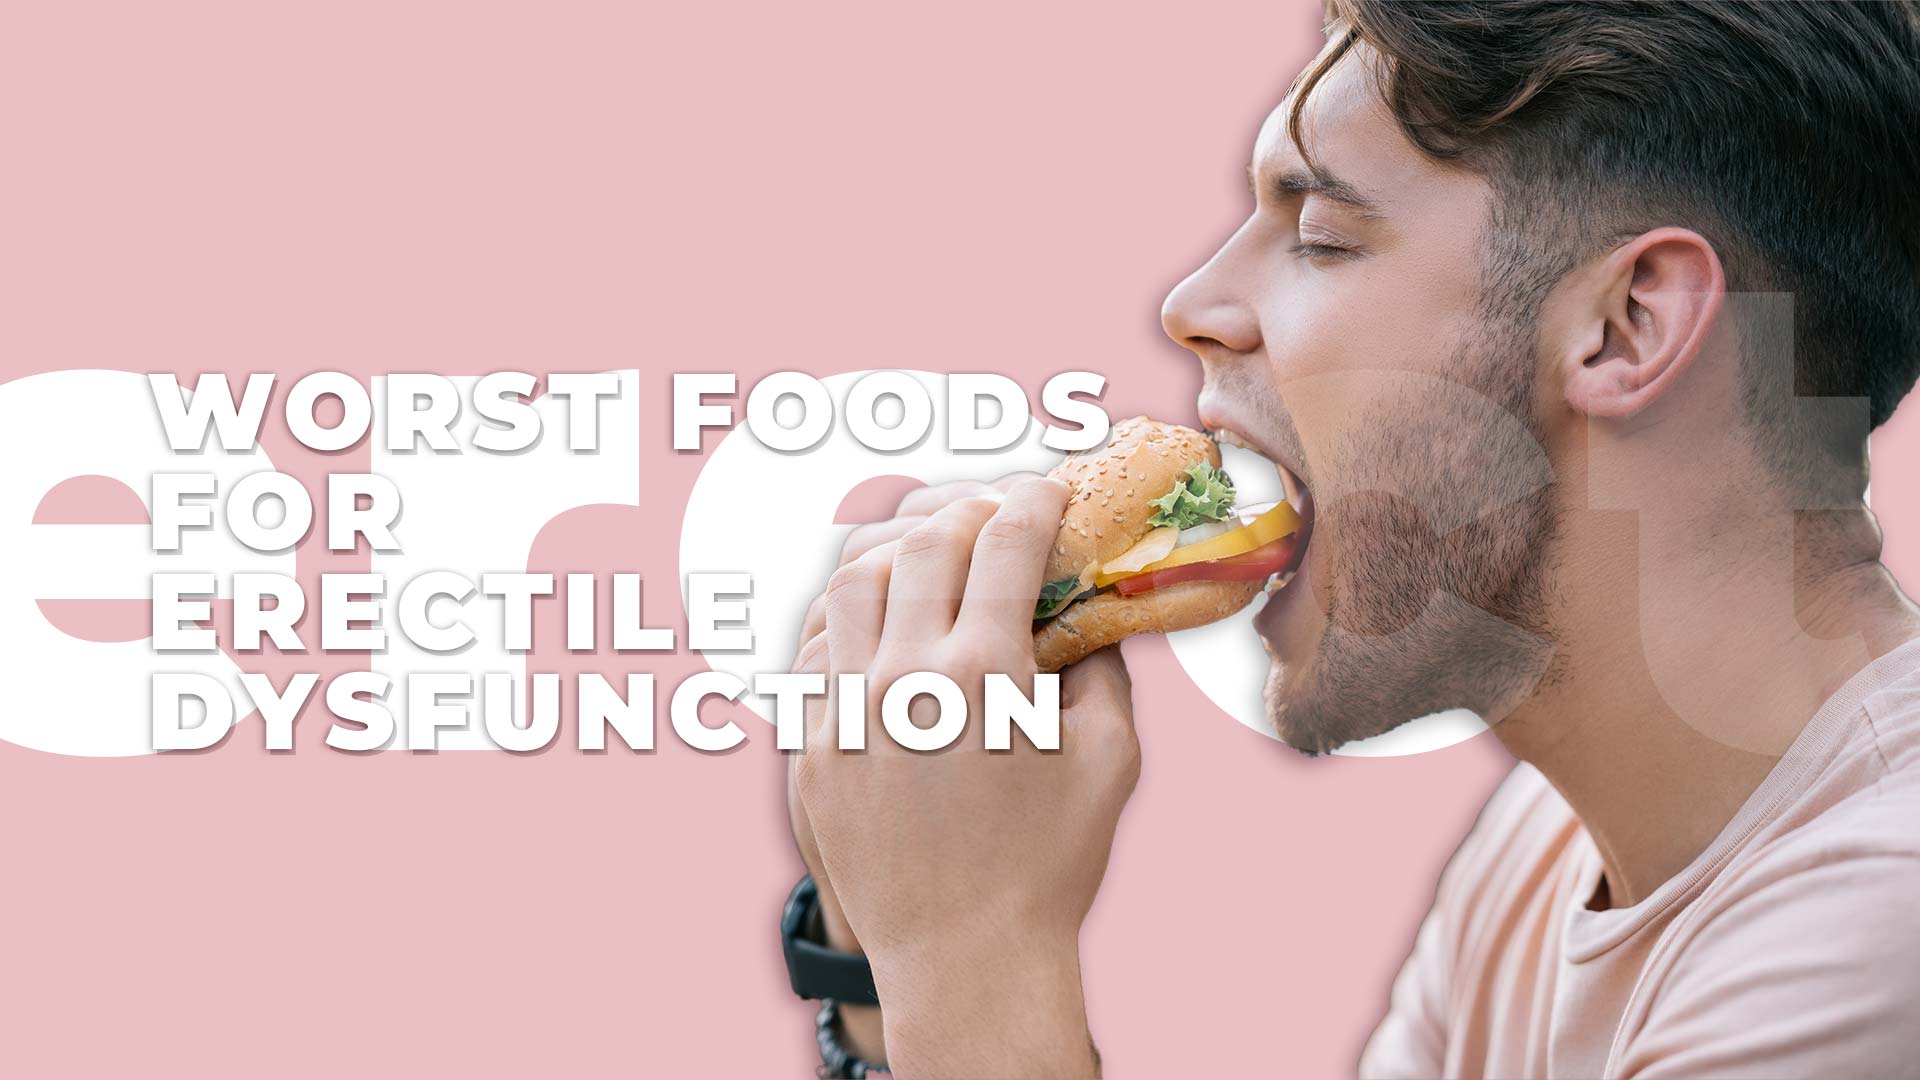 Worst Foods For Erectile Dysfunction